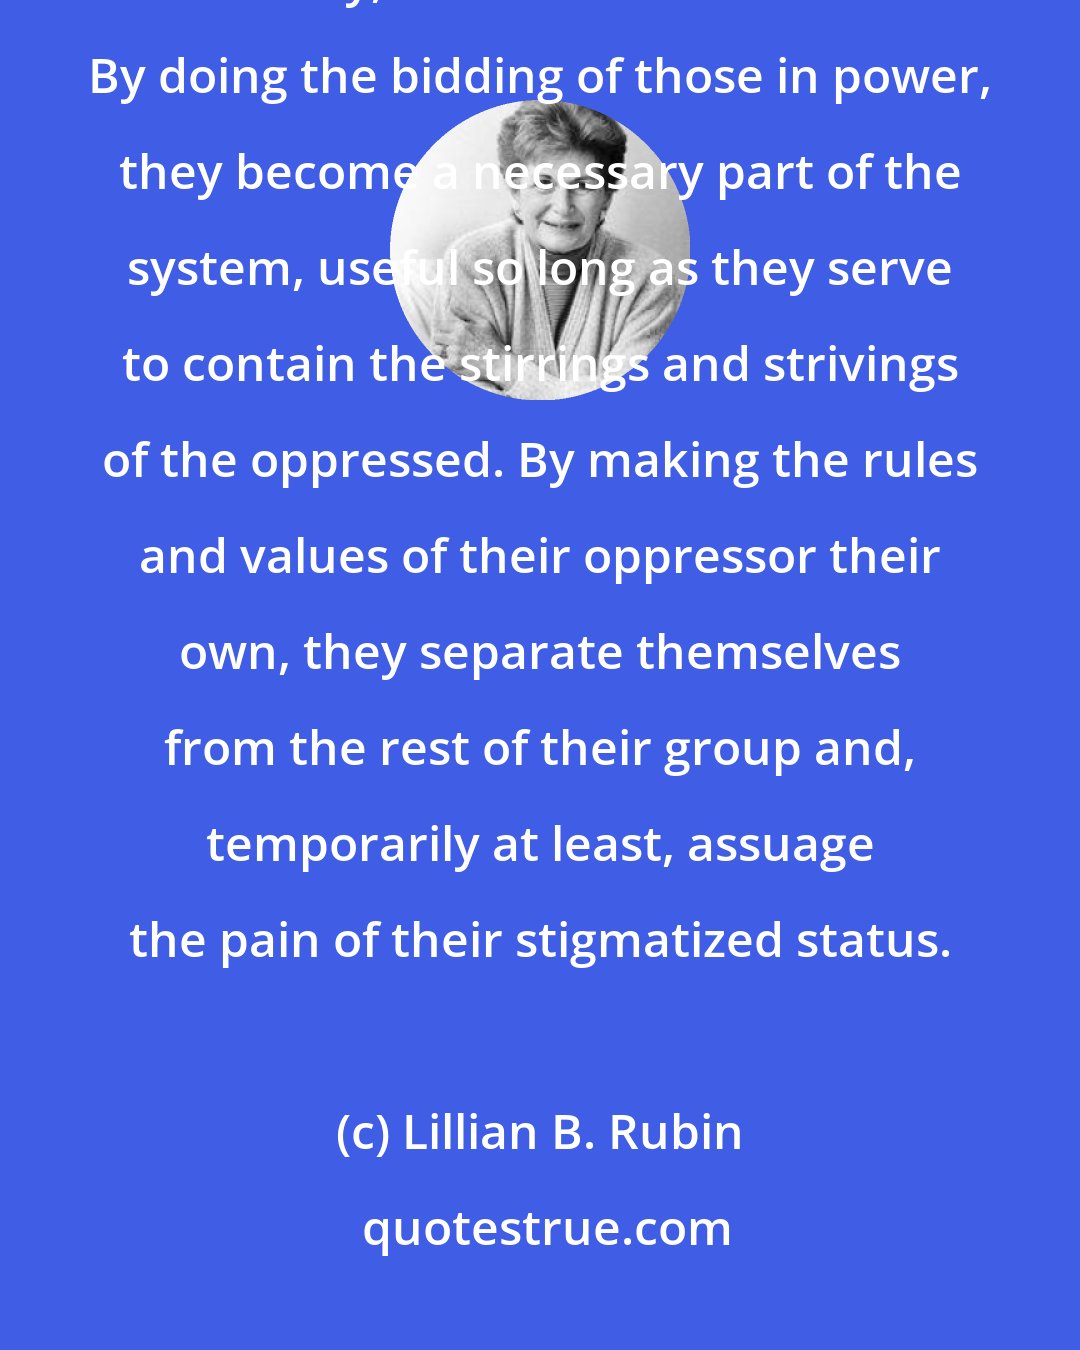 Lillian B. Rubin: By identifying with the powerful, the disempowered achieve a measure of safety, at least for a moment. By doing the bidding of those in power, they become a necessary part of the system, useful so long as they serve to contain the stirrings and strivings of the oppressed. By making the rules and values of their oppressor their own, they separate themselves from the rest of their group and, temporarily at least, assuage the pain of their stigmatized status.